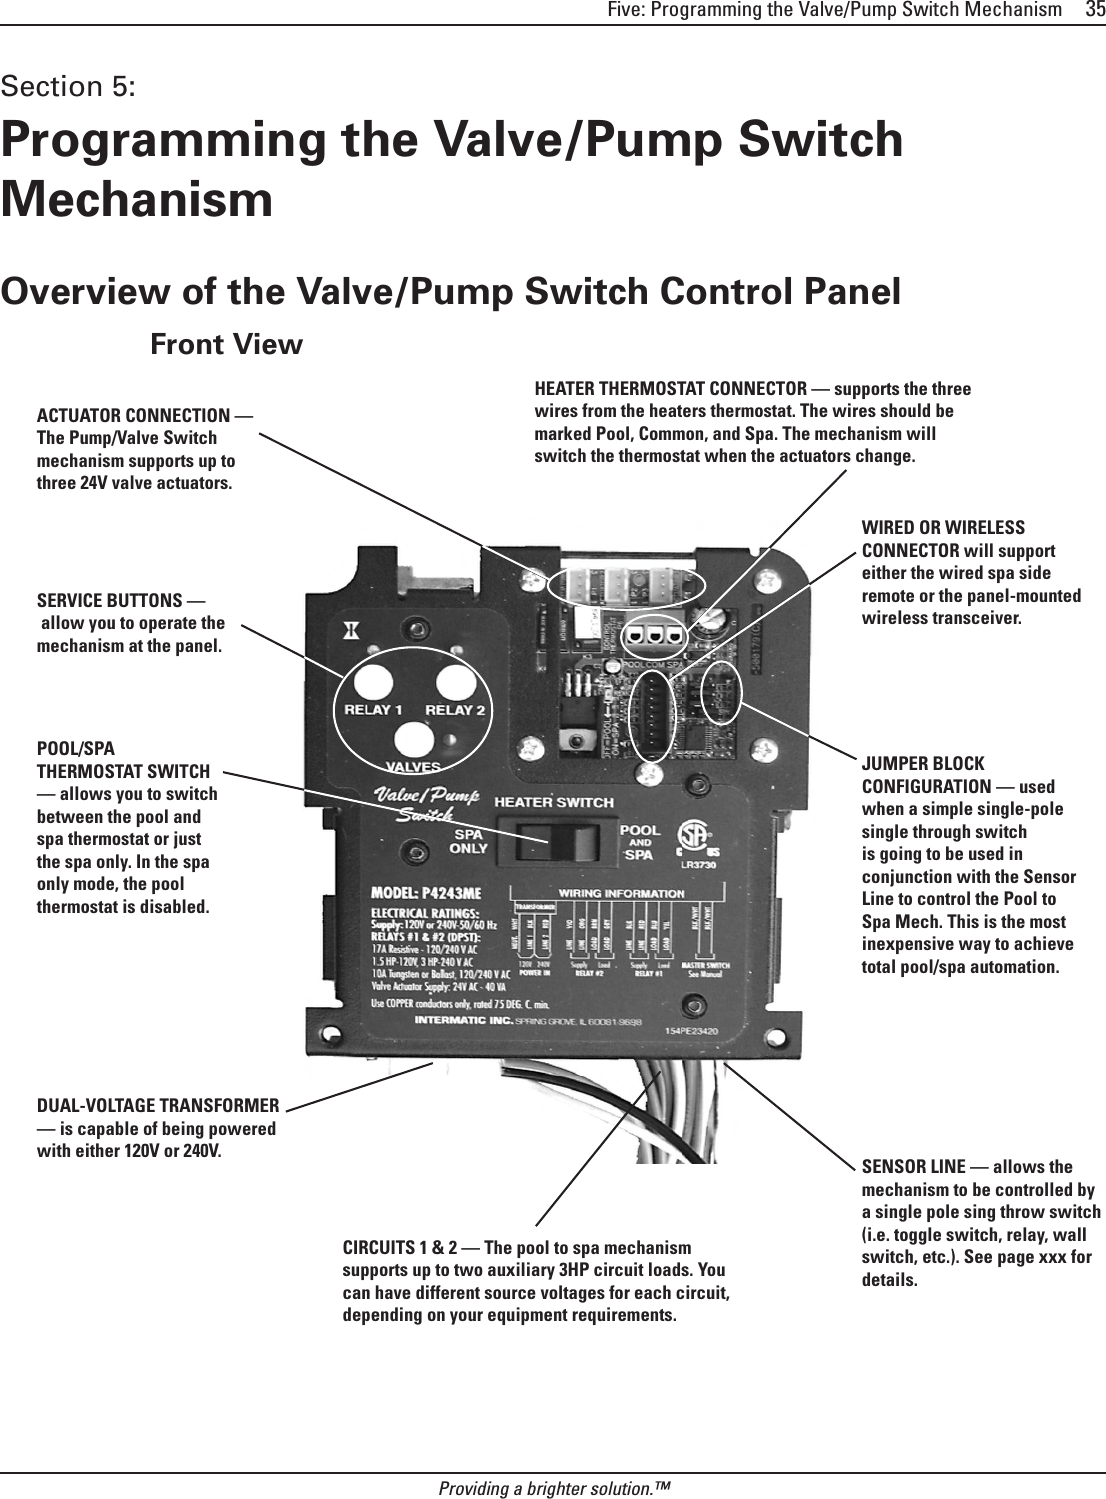 Five: Programming the Valve/Pump Switch Mechanism     35Providing a brighter solution.™Section 5:  Programming the Valve/Pump Switch MechanismOverview of the Valve/Pump Switch Control PanelFront ViewACTUATOR CONNECTION —  The Pump/Valve Switch  mechanism supports up to three 24V valve actuators.HEATER THERMOSTAT CONNECTOR — supports the three wires from the heaters thermostat. The wires should be marked Pool, Common, and Spa. The mechanism will switch the thermostat when the actuators change.WIRED OR WIRELESS CONNECTOR will support either the wired spa side remote or the panel-mounted wireless transceiver.JUMPER BLOCK CONFIGURATION — used when a simple single-pole single through switch is going to be used in conjunction with the Sensor Line to control the Pool to Spa Mech. This is the most inexpensive way to achieve total pool/spa automation.SENSOR LINE — allows the mechanism to be controlled by a single pole sing throw switch (i.e. toggle switch, relay, wall switch, etc.). See page xxx for details.SERVICE BUTTONS —  allow you to operate the mechanism at the panel.POOL/SPA THERMOSTAT SWITCH — allows you to switch between the pool and spa thermostat or just the spa only. In the spa only mode, the pool thermostat is disabled.DUAL-VOLTAGE TRANSFORMER — is capable of being powered with either 120V or 240V.CIRCUITS 1 &amp; 2 — The pool to spa mechanism supports up to two auxiliary 3HP circuit loads. You can have different source voltages for each circuit, depending on your equipment requirements.